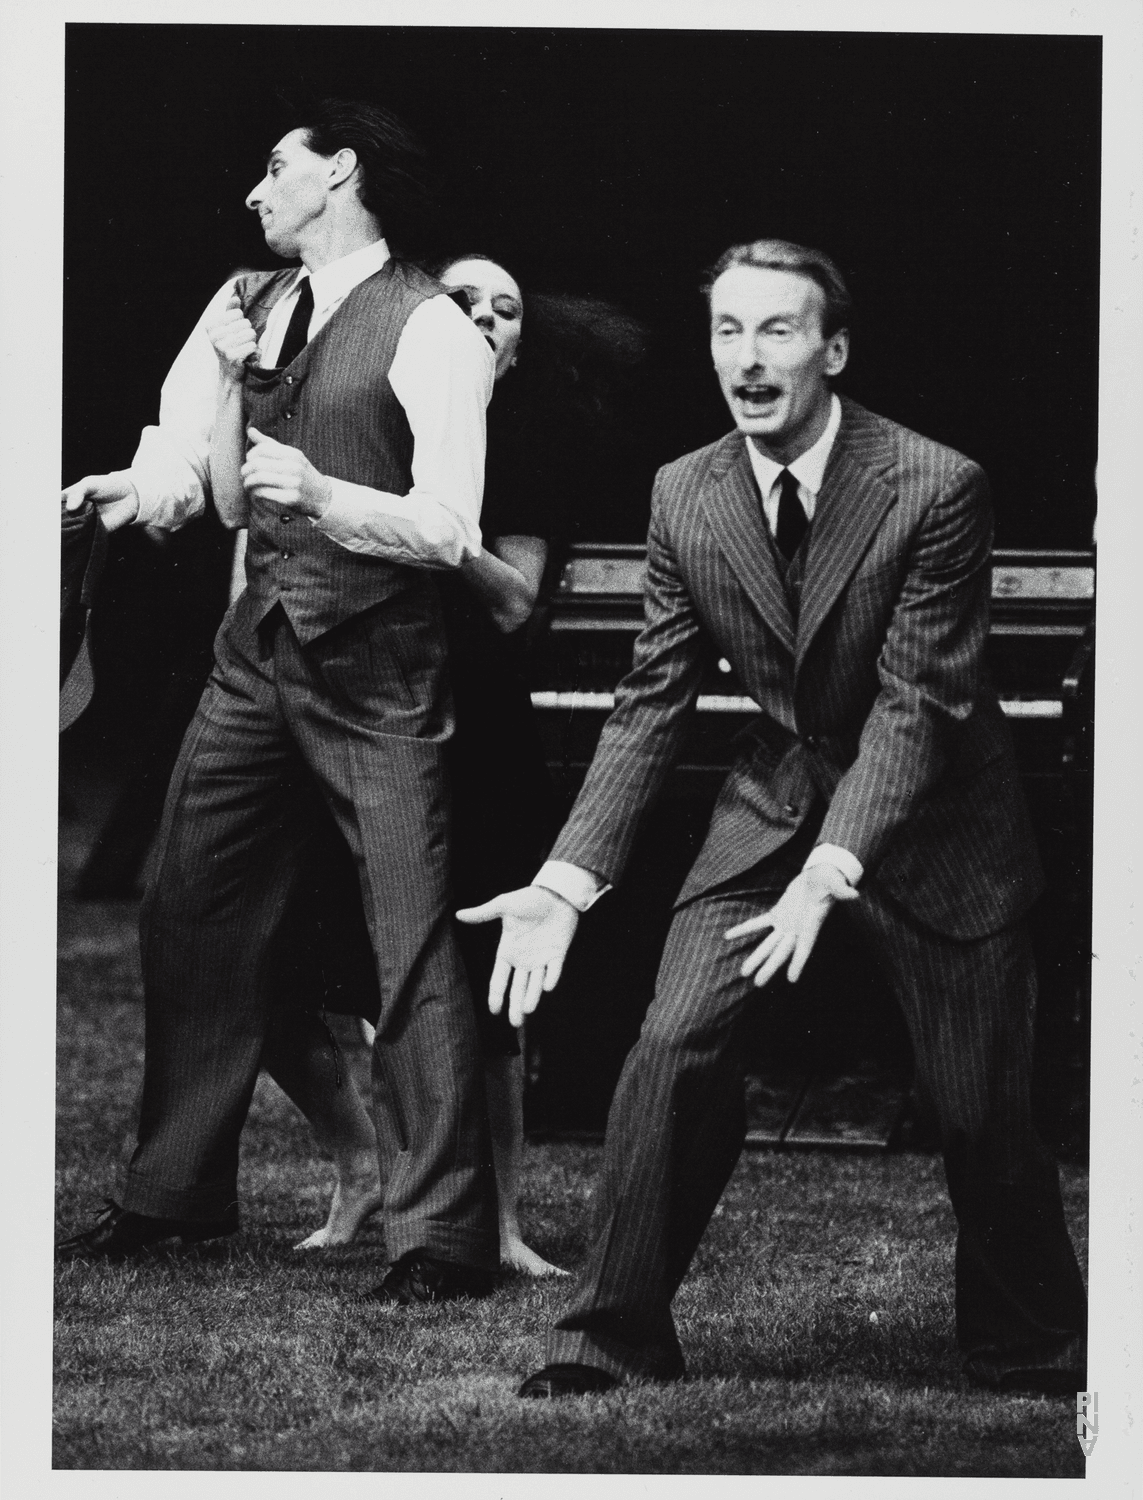 Dominique Mercy, Mark Alan Wilson and Nazareth Panadero in “1980 – A Piece by Pina Bausch” by Pina Bausch